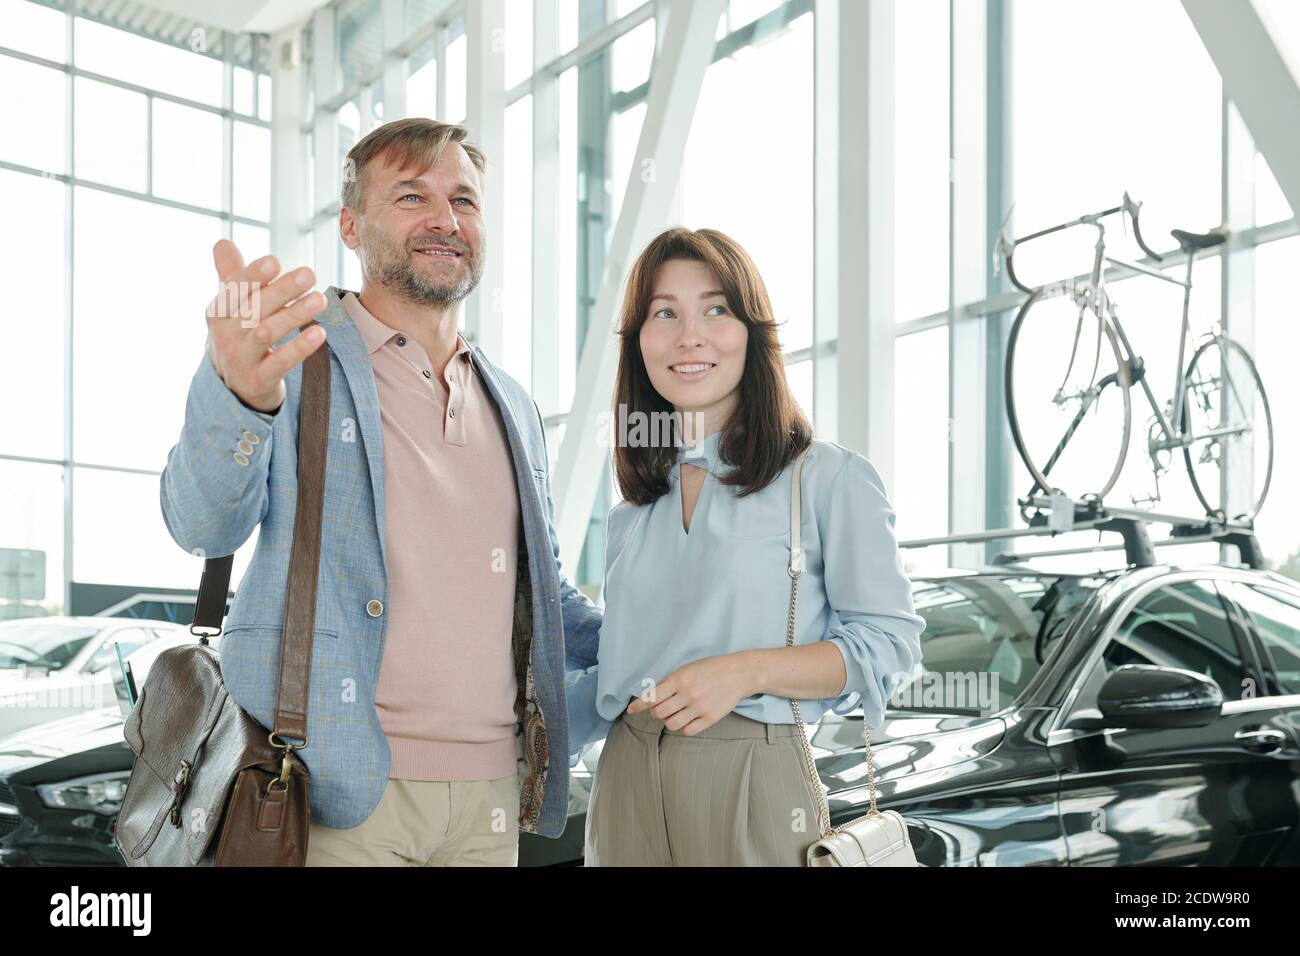 Happy mature man in smart casualwear showing his smiling wife variety of cars Stock Photo